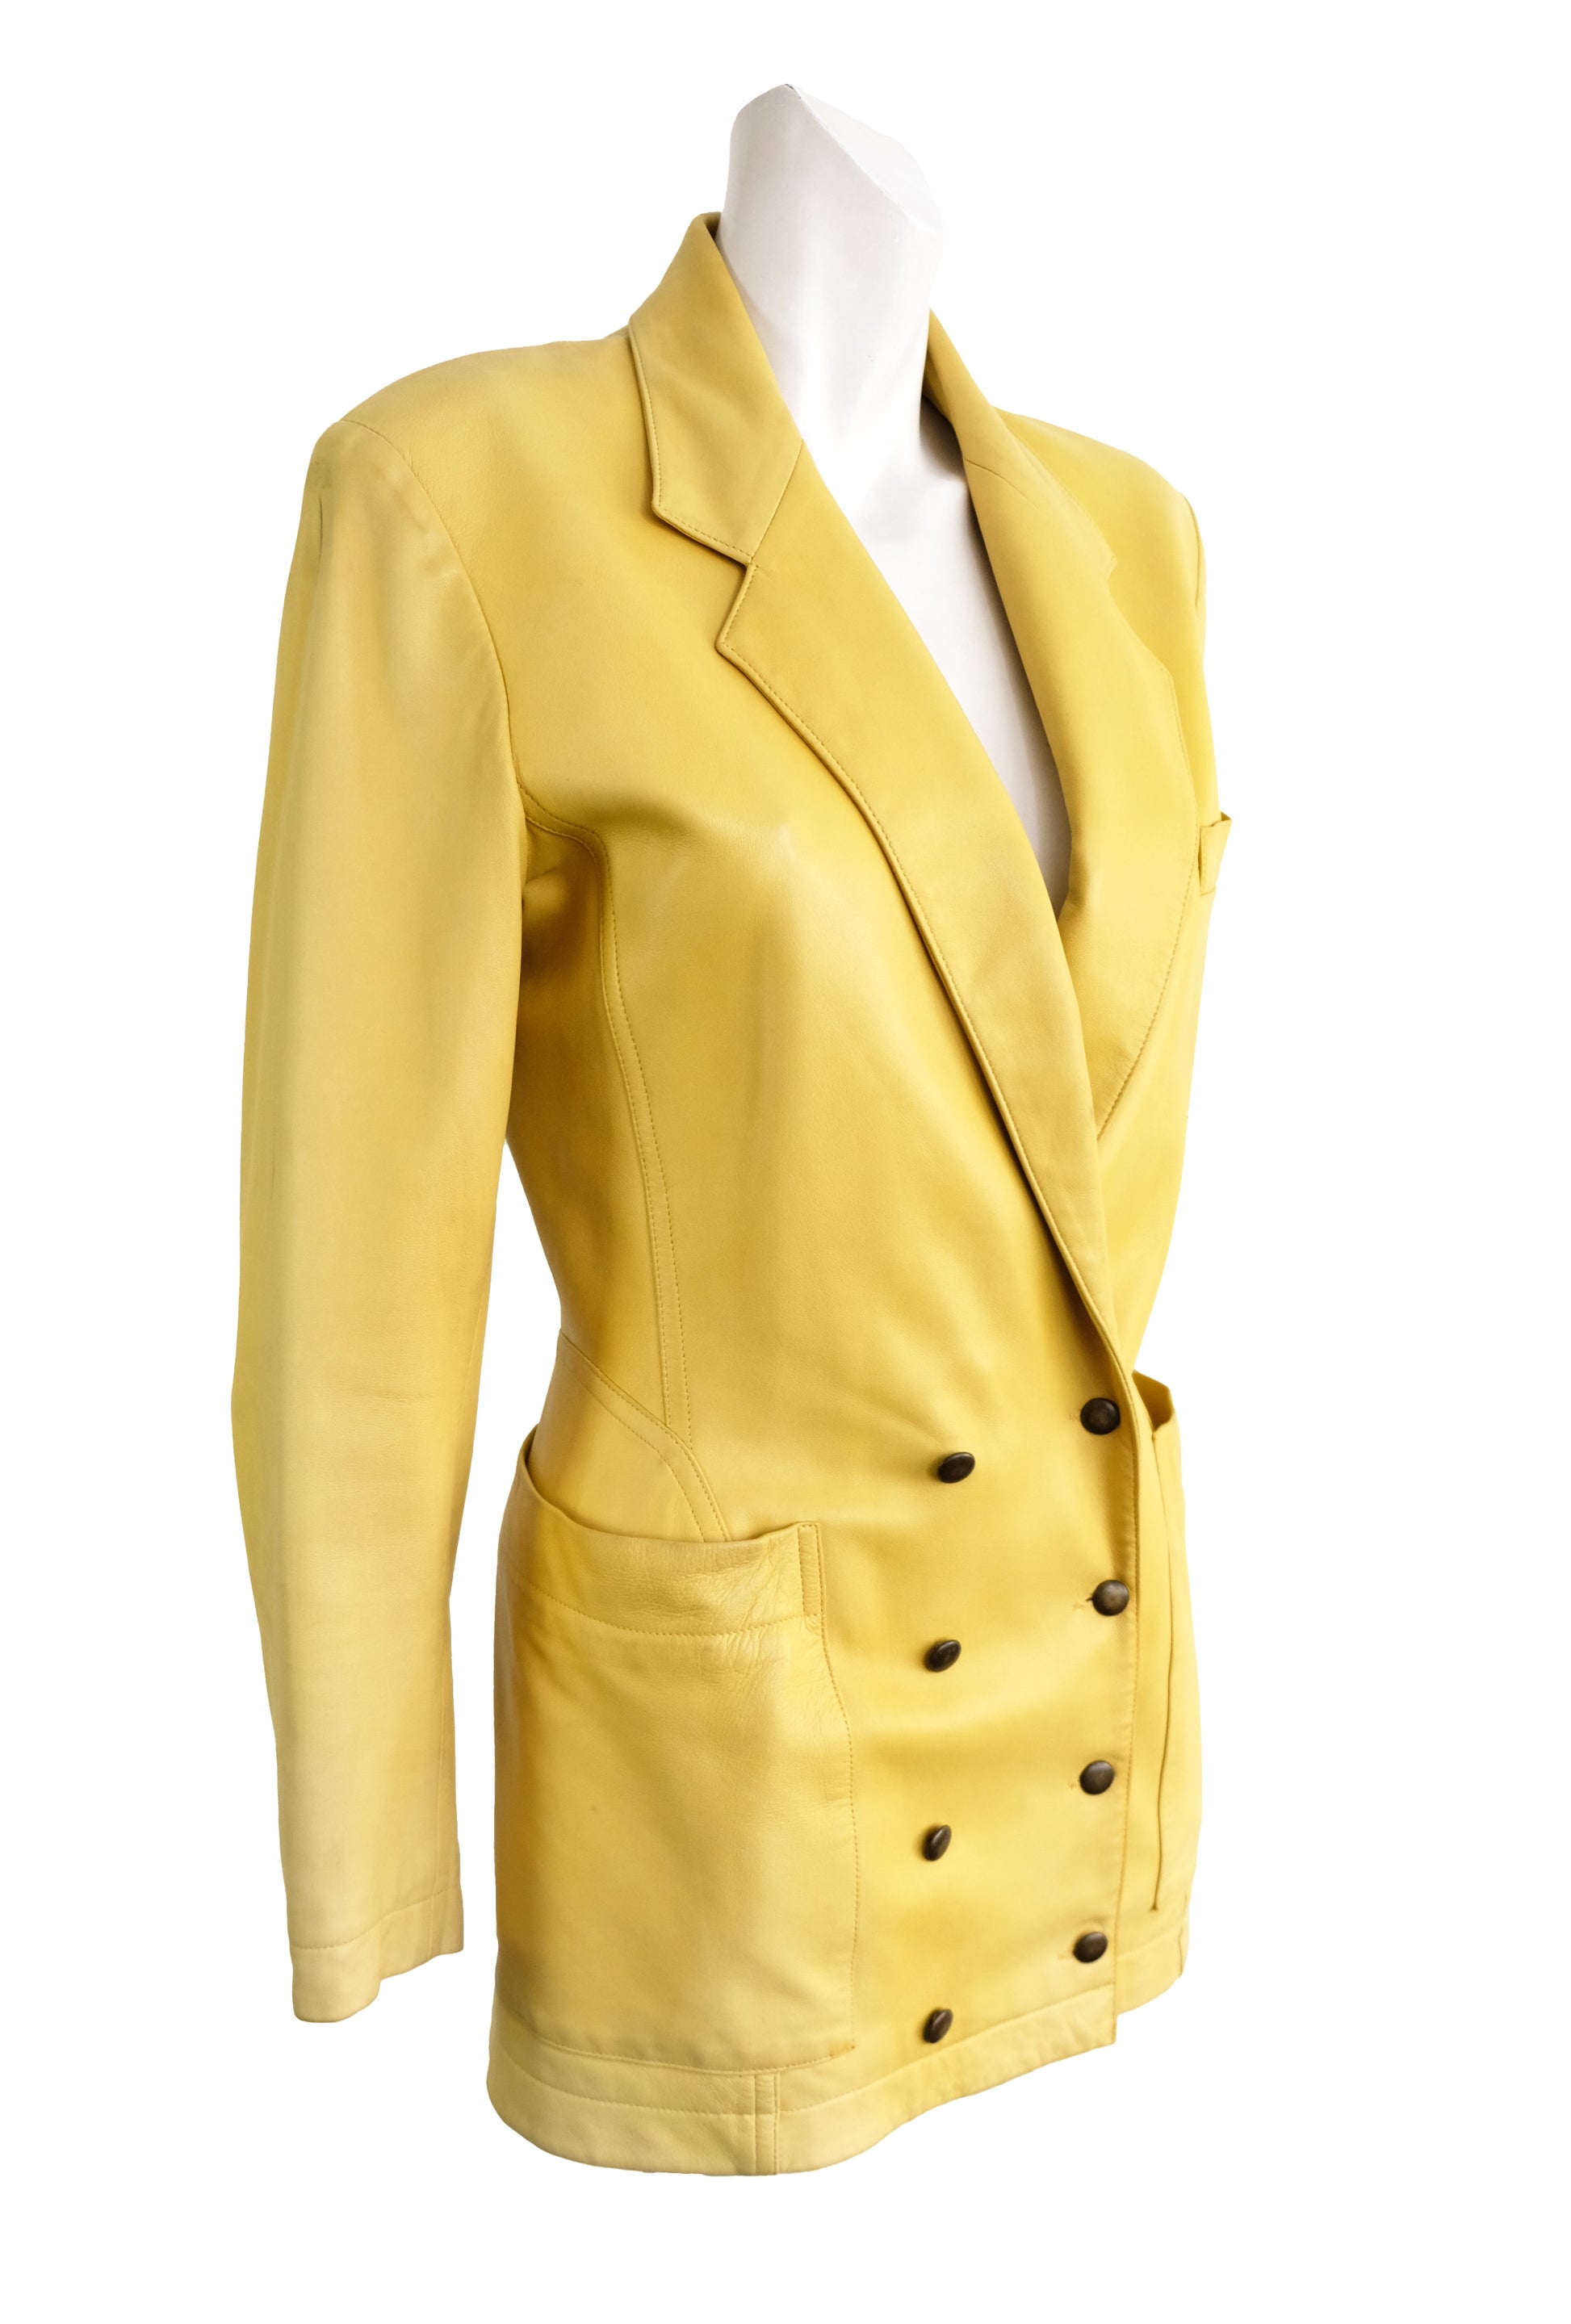 Alaïa Vintage Long Tailored Jacket in Yellow Leather, UK10-12